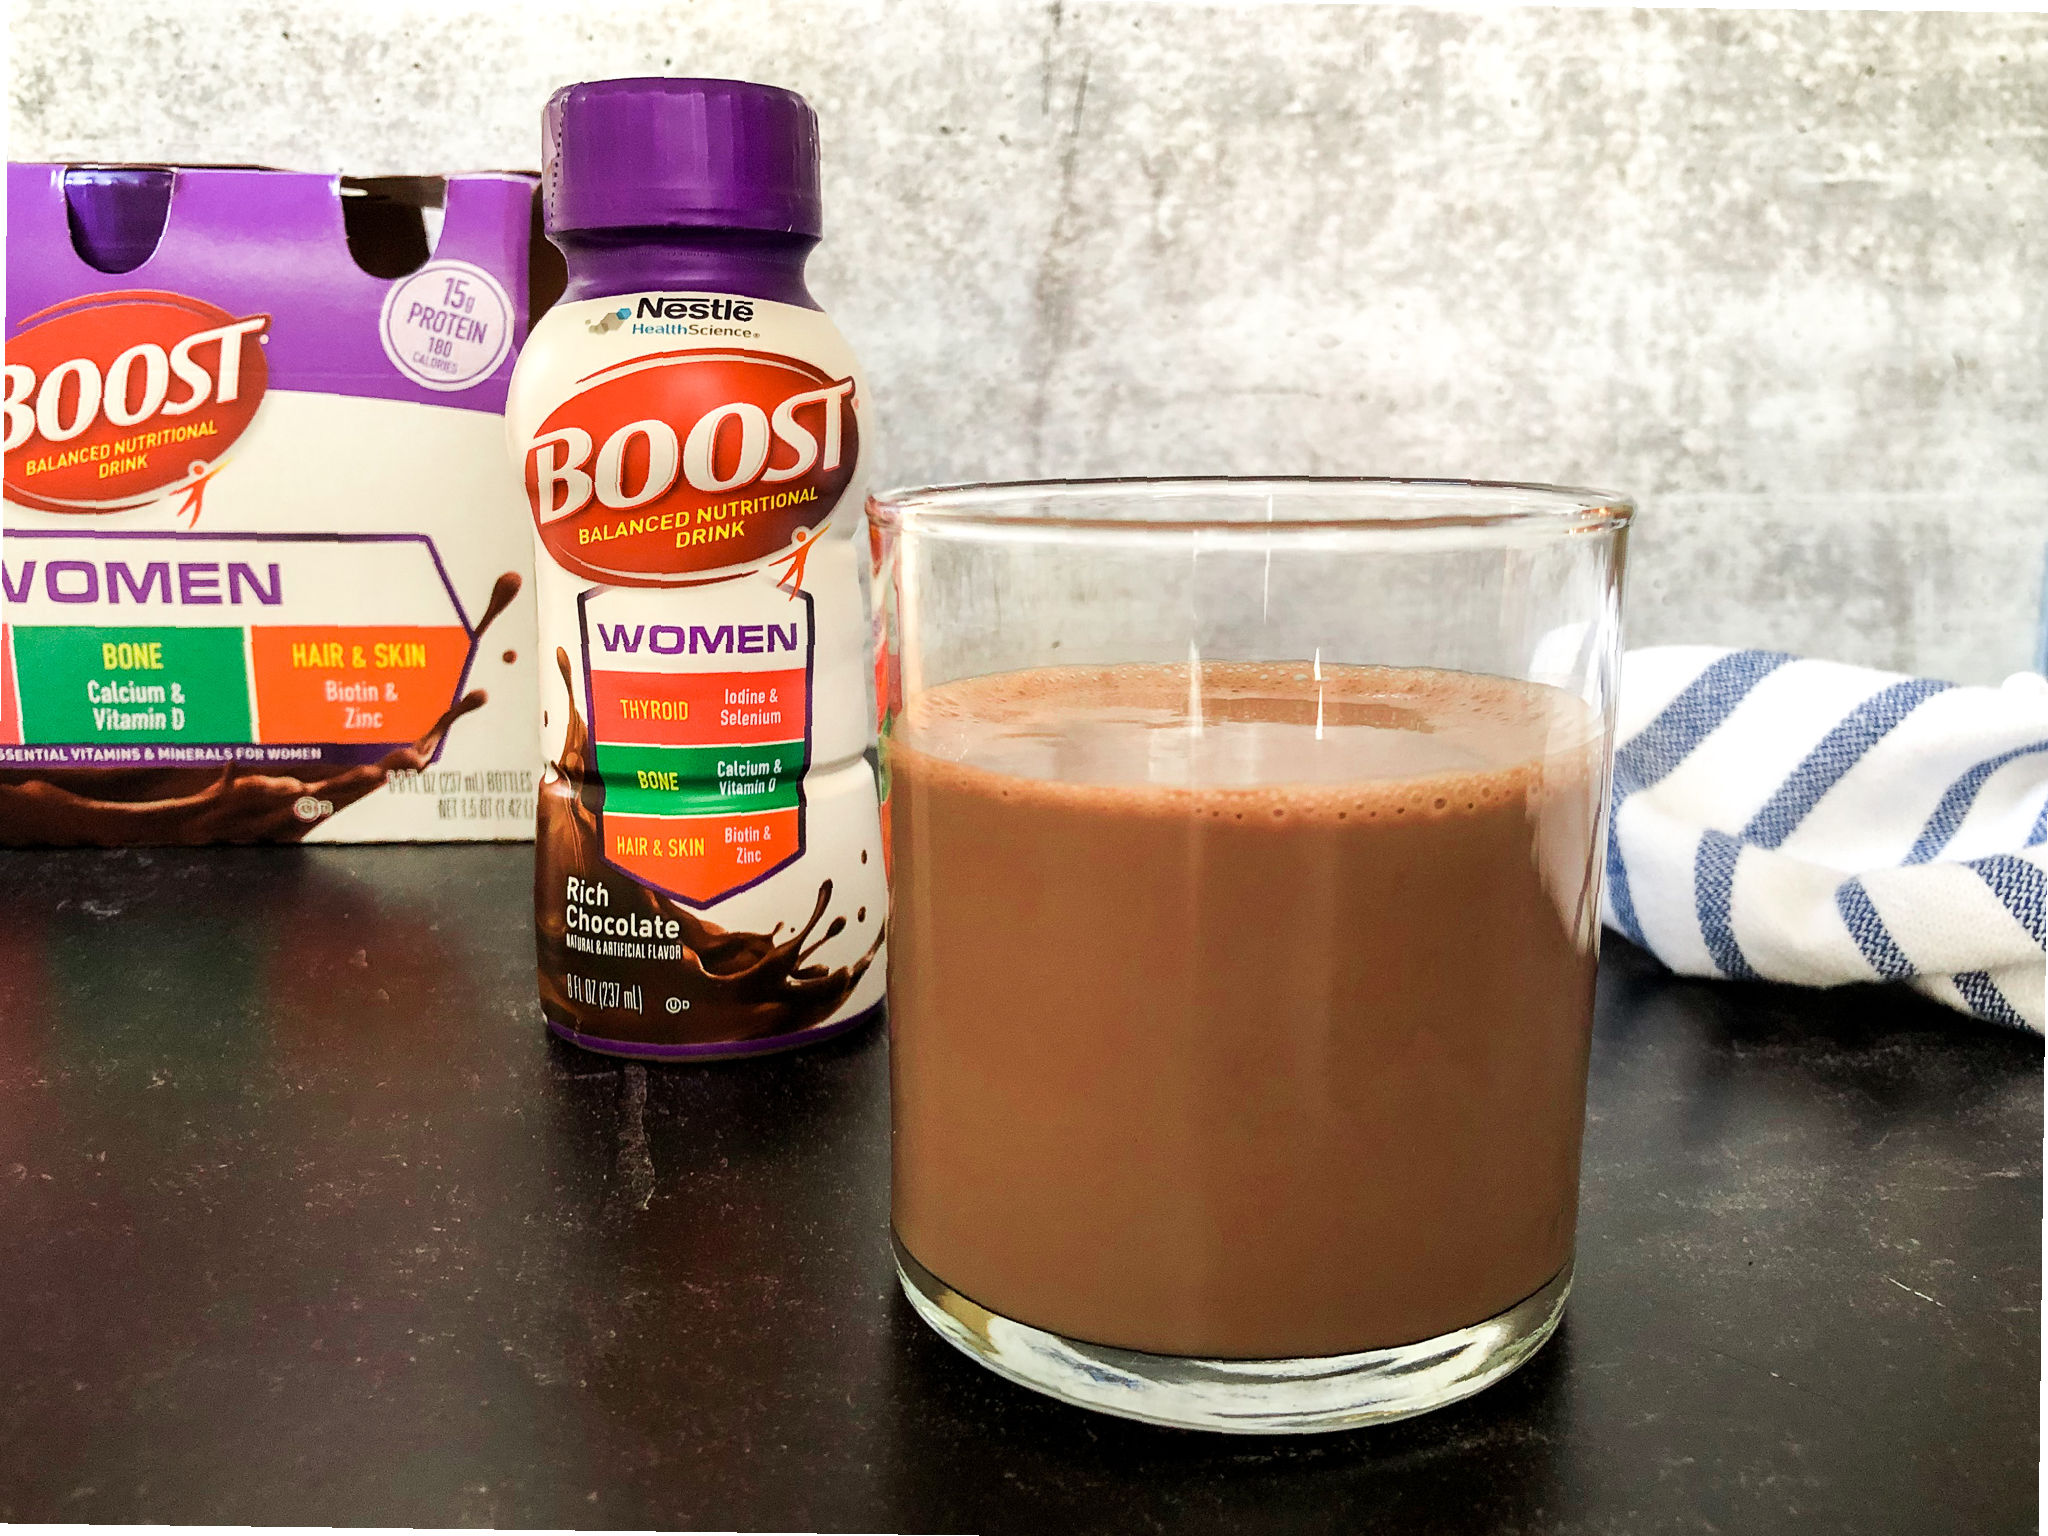 Get Your Favorite BOOST® Nutritional Drinks & Save This Week At Publix on I Heart Publix